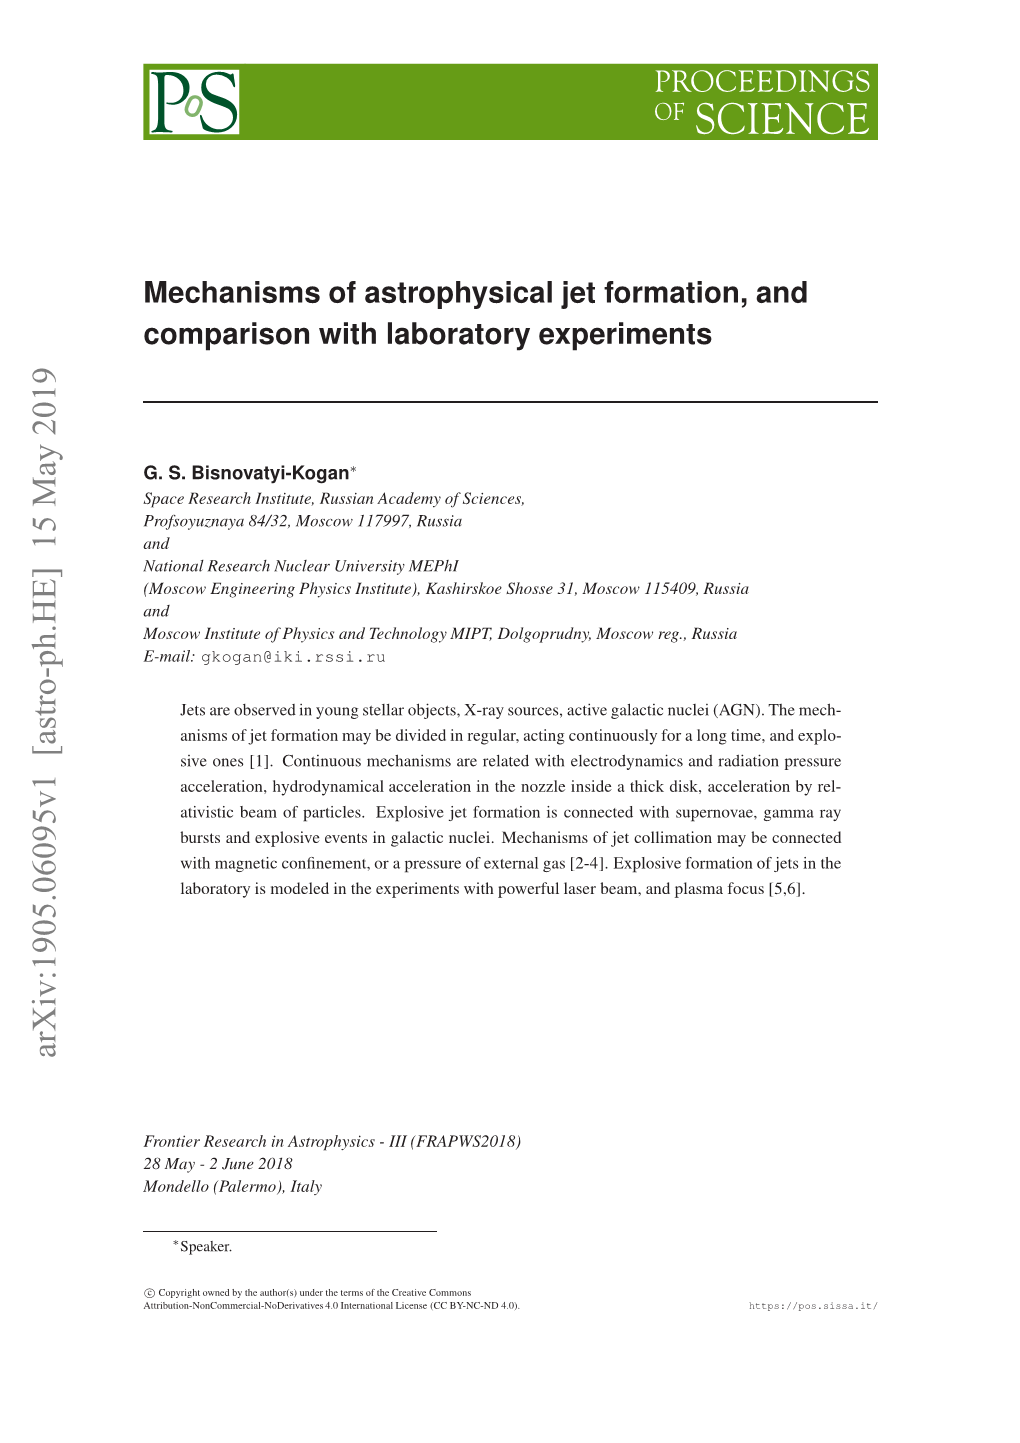 Mechanisms of Astrophysical Jet Formation, and Comparison with Laboratory Experiments